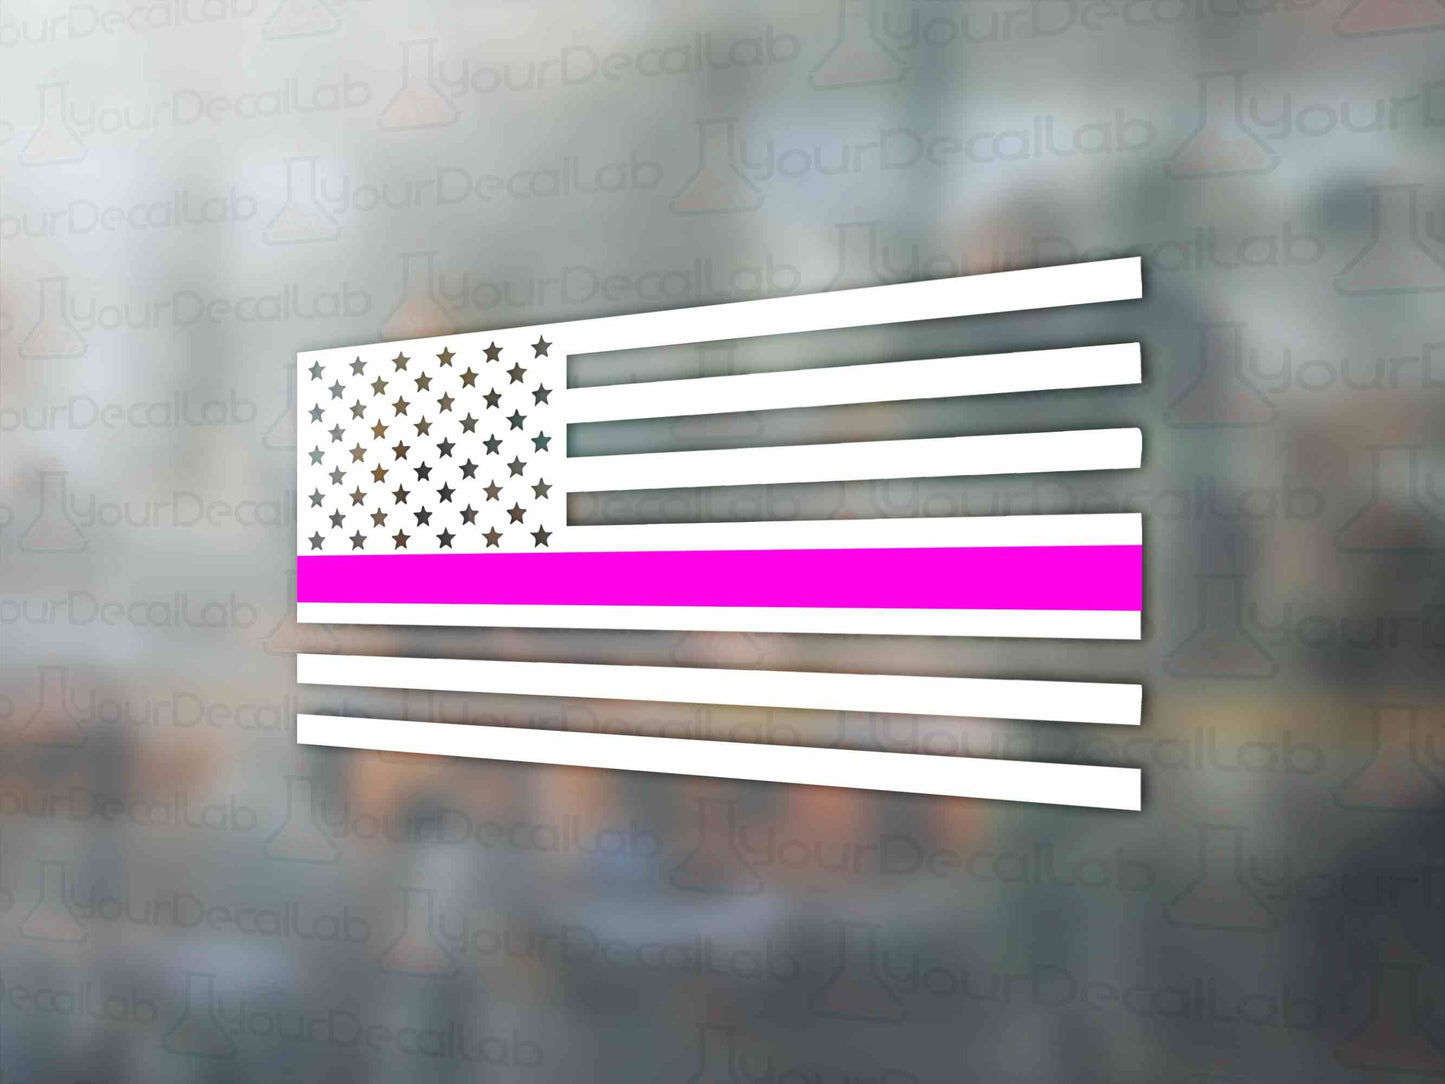 Pink Line Decal American Flag - Many Colors & Sizes